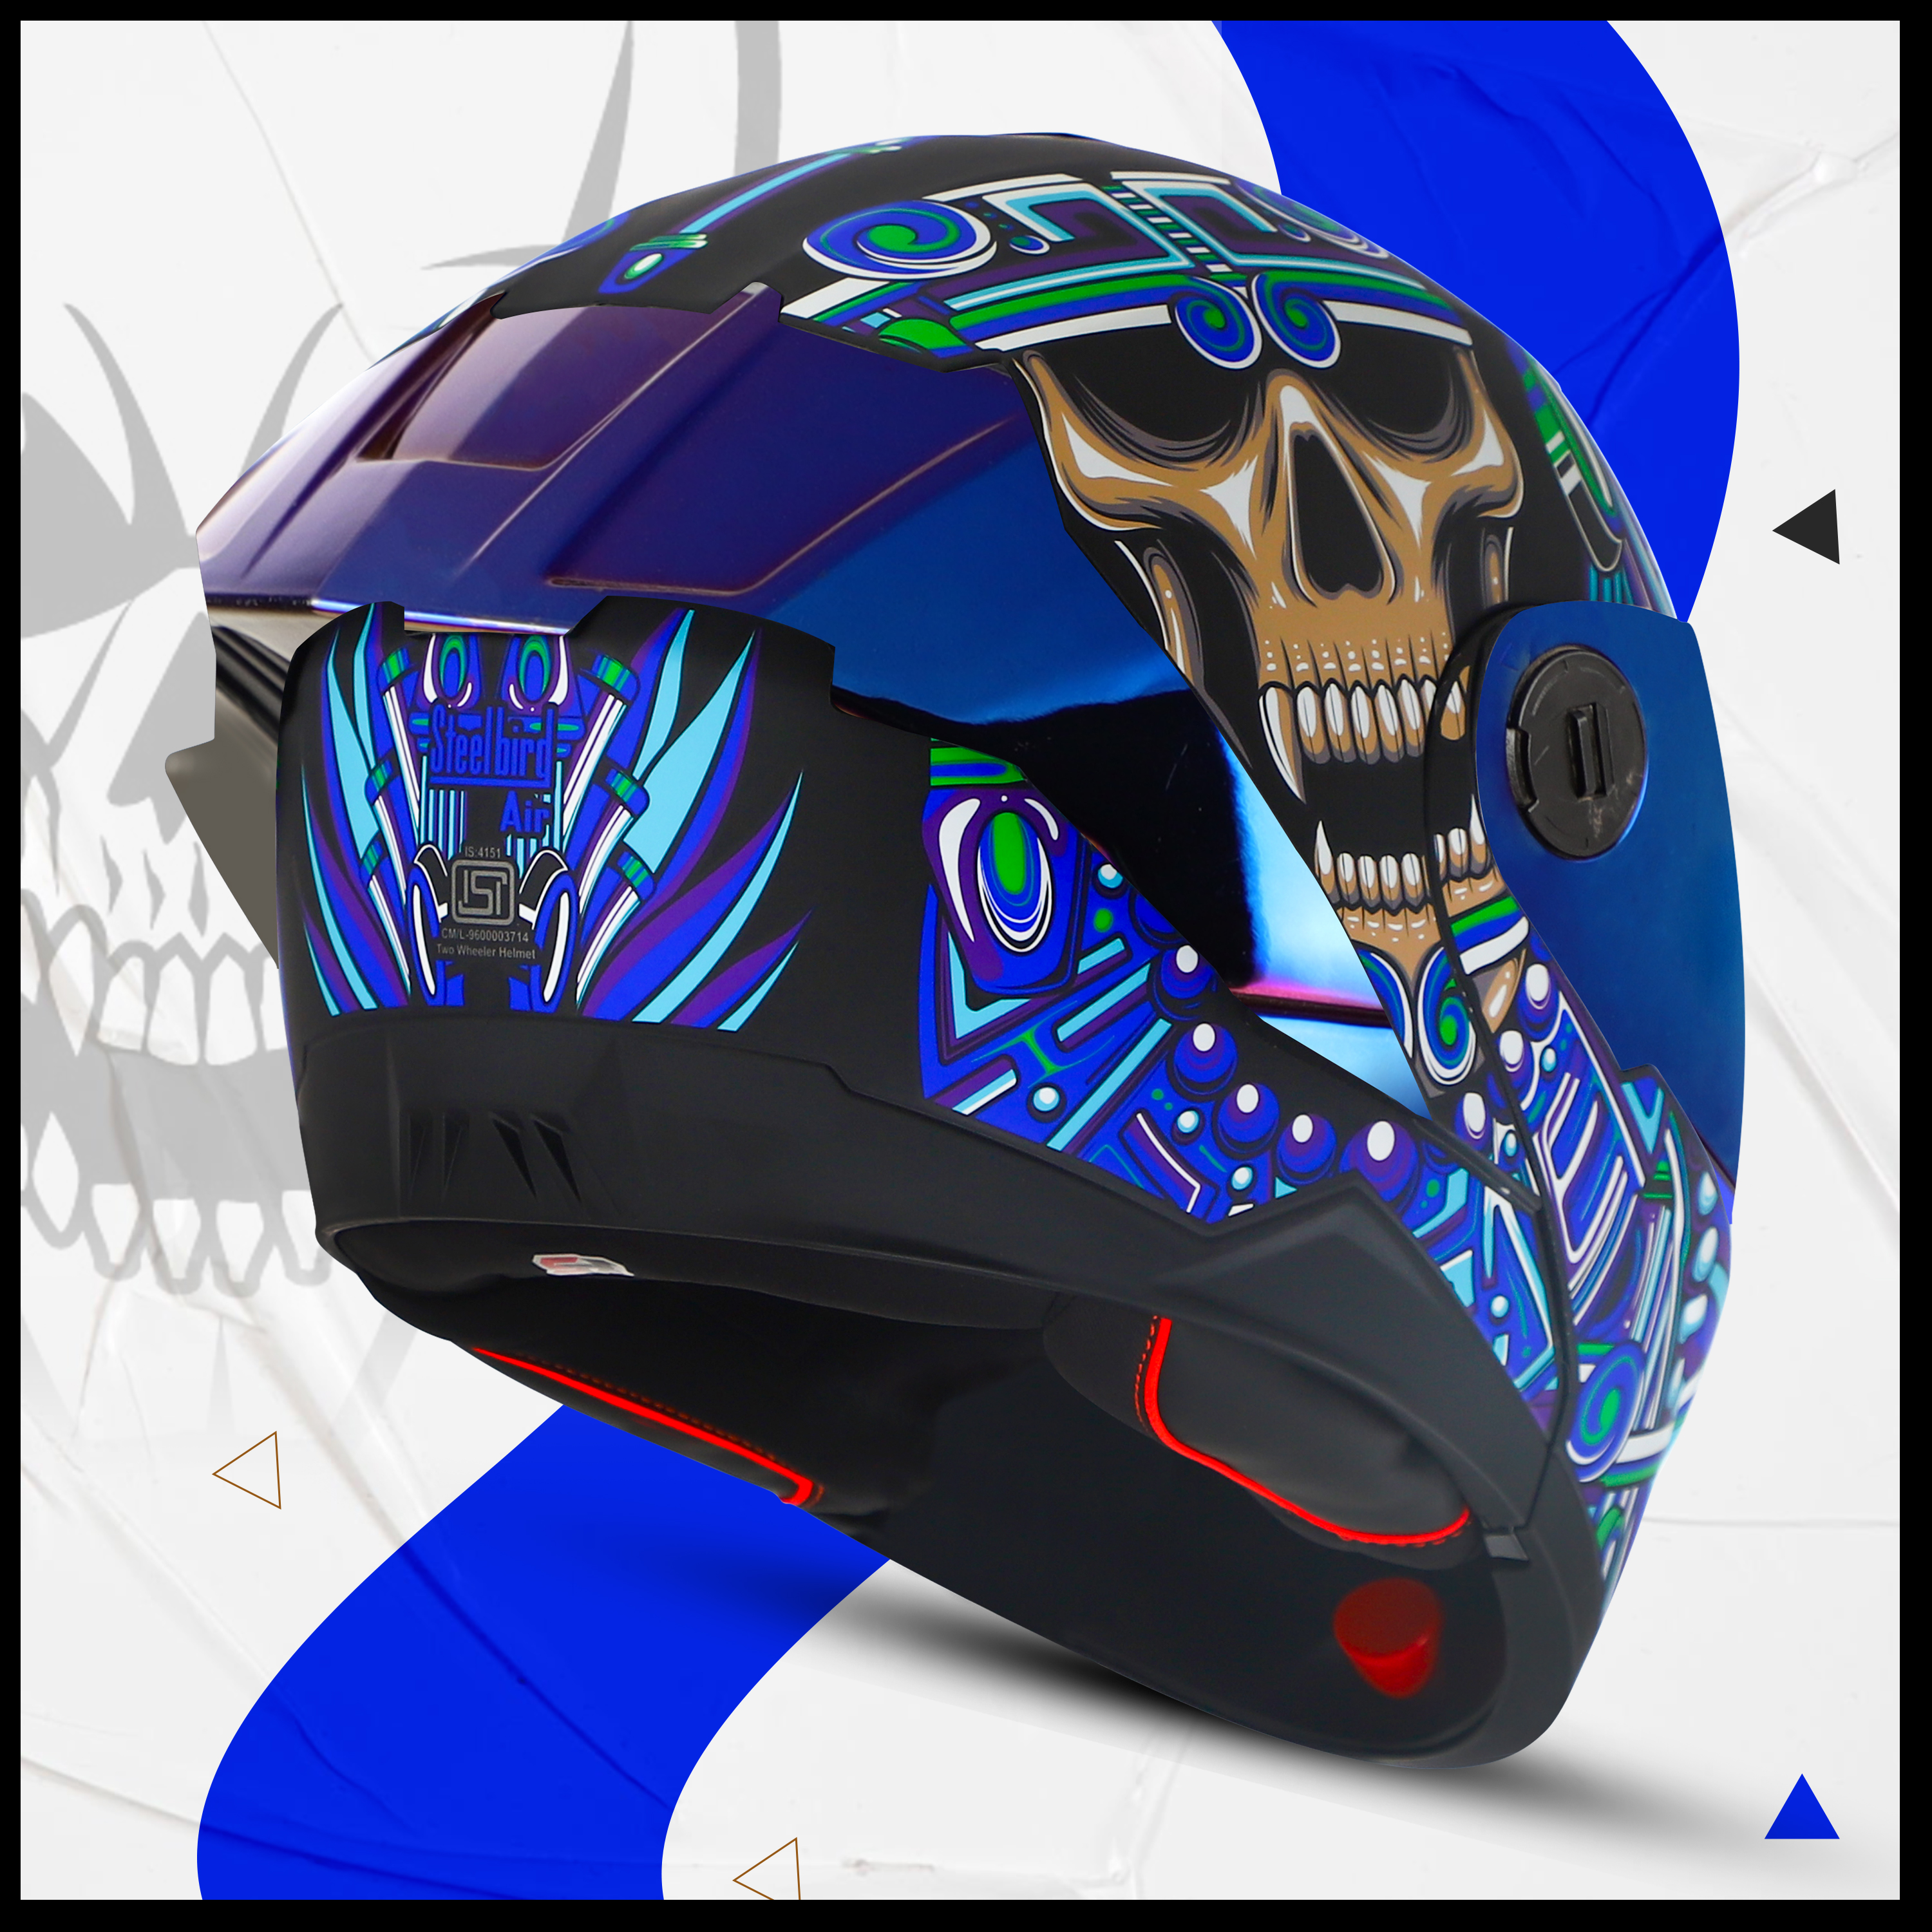 Steelbird SBA-8 Hunt ISI Certified Flip-Up Graphic Helmet For Men And Women (Glossy Black Blue With Blue Spoiler And Chrome Blue Visor)